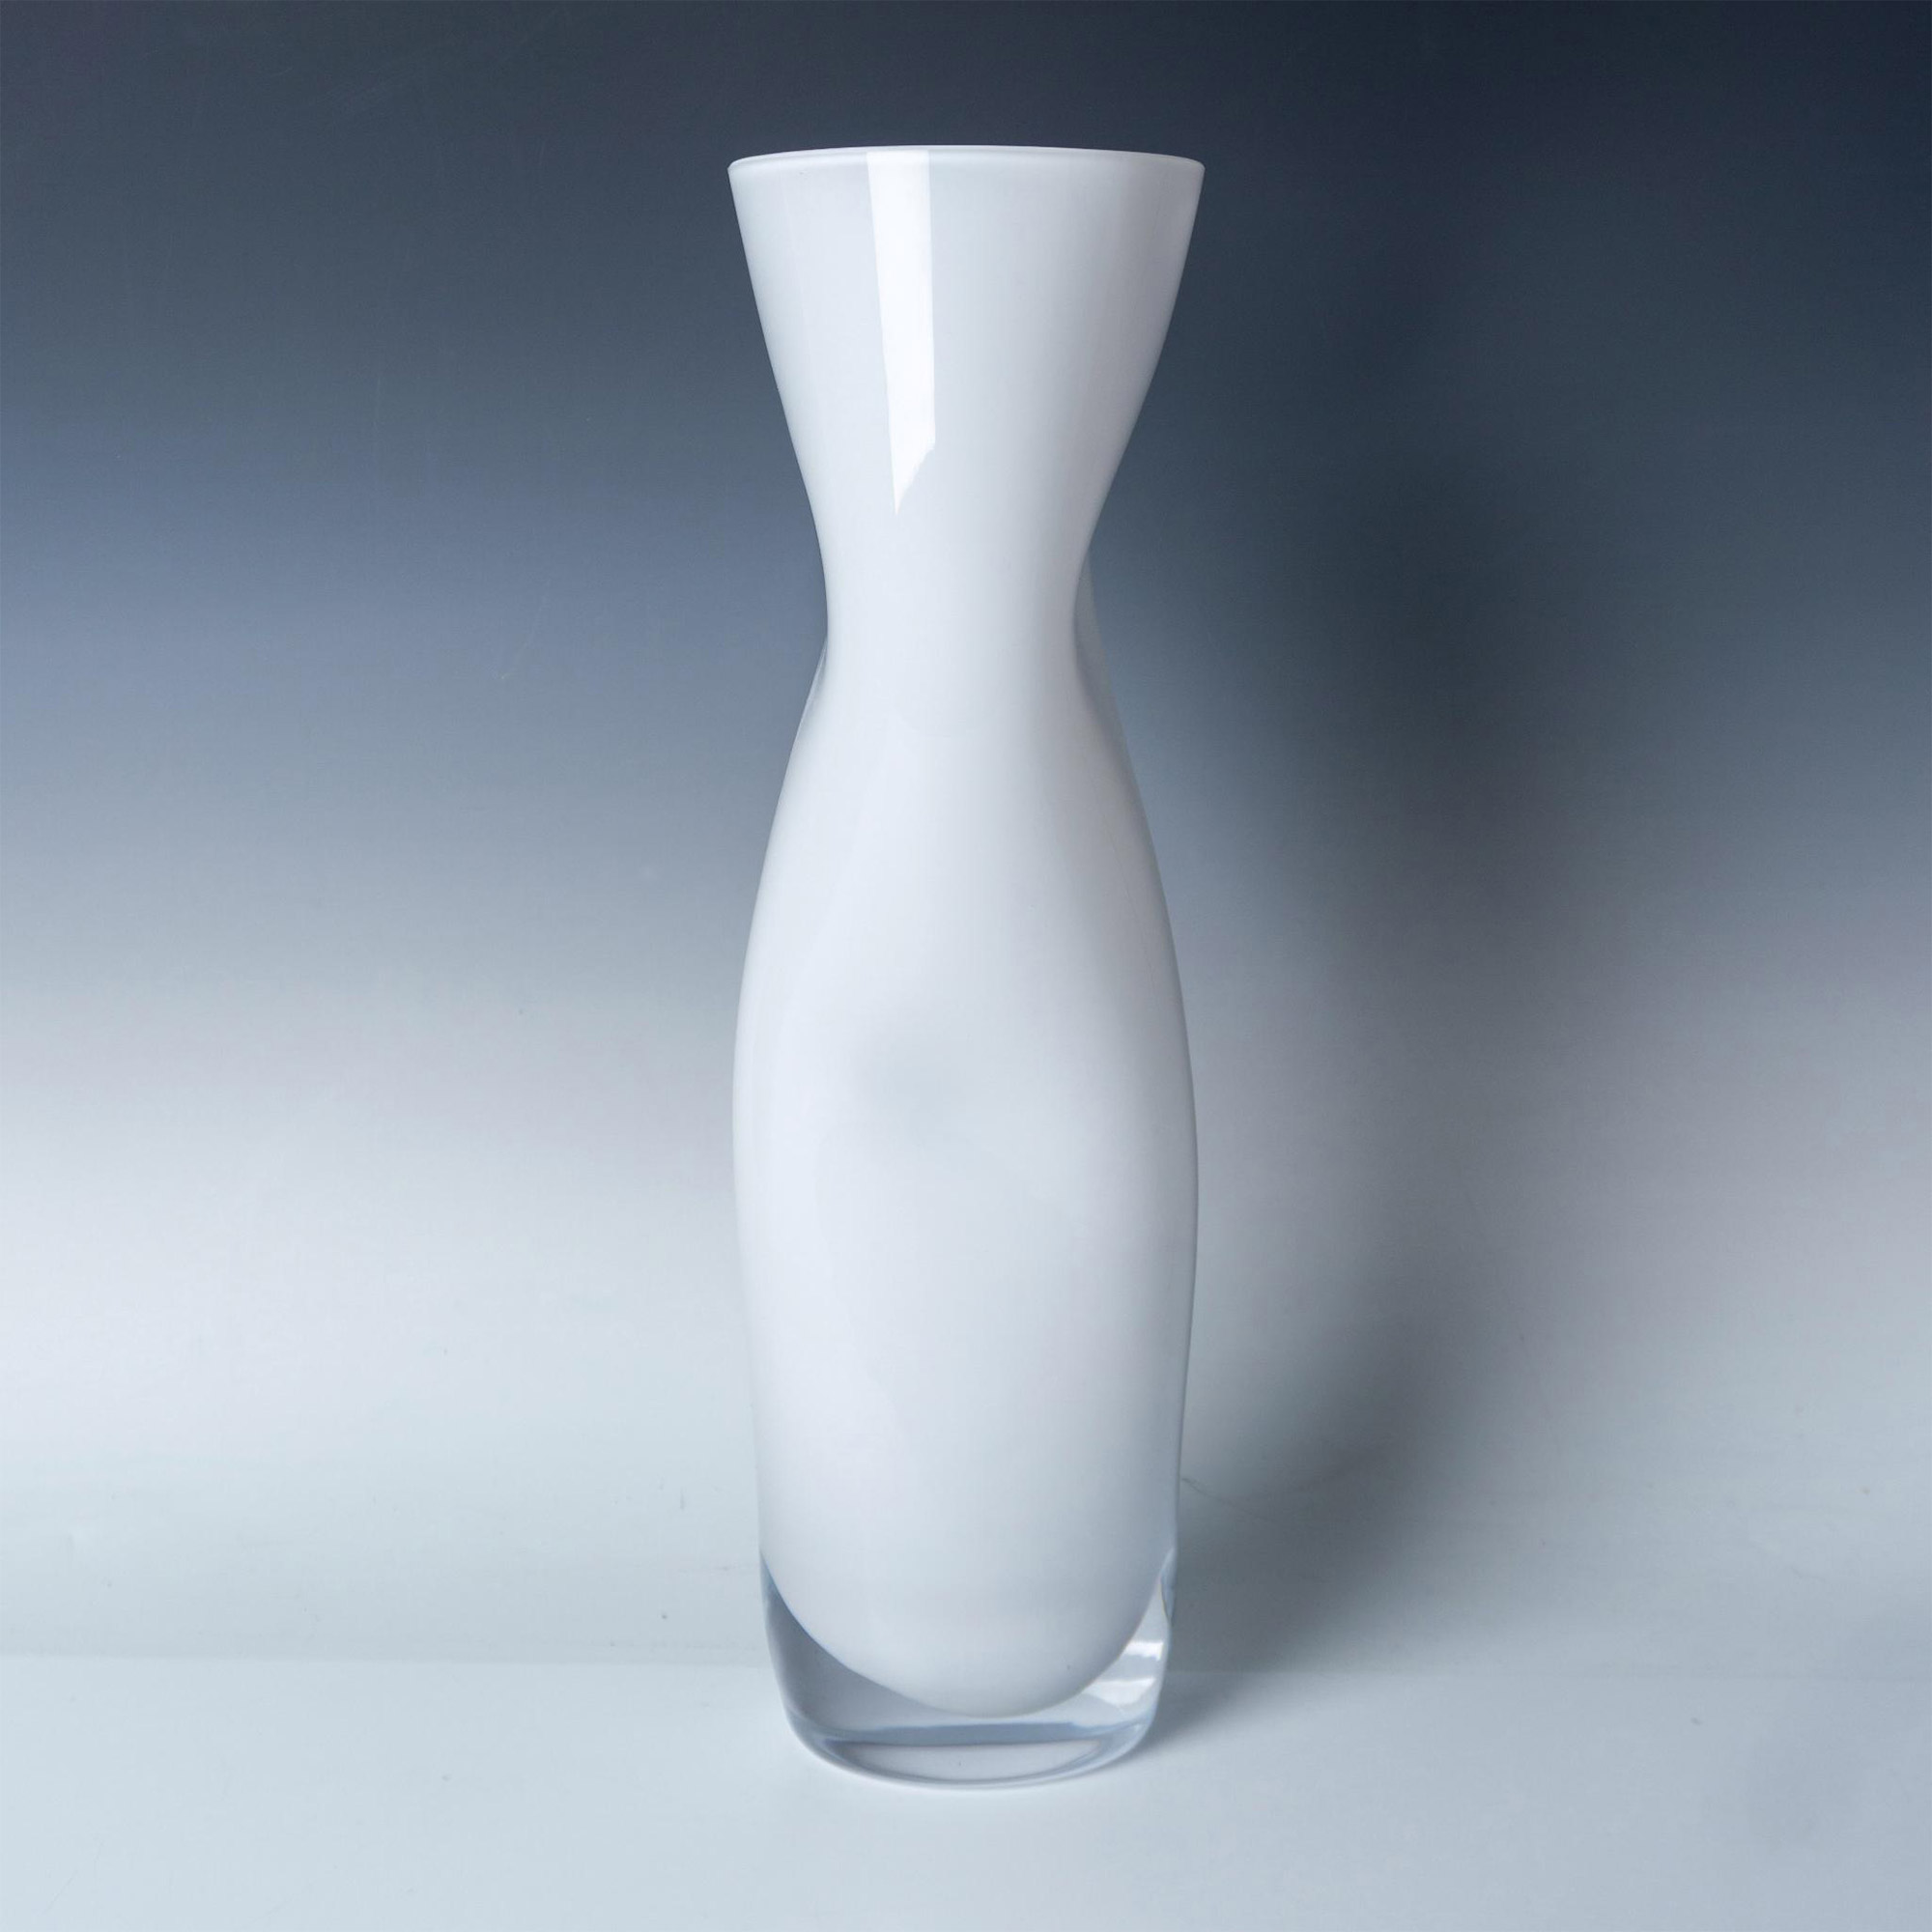 Orrefors Crystal Vase Squeeze White Tall - Image 3 of 4